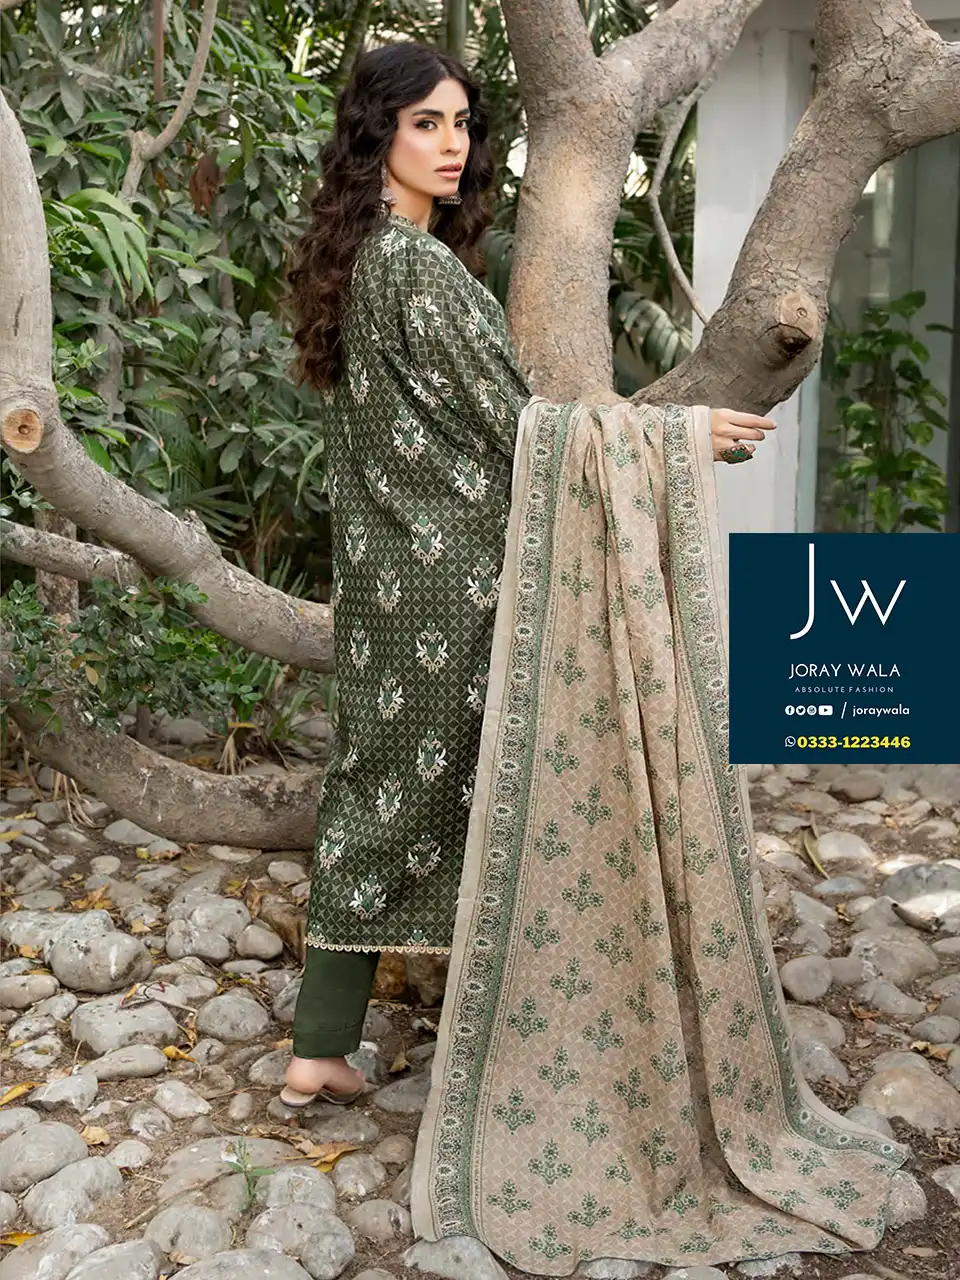 Zesh Summer Printed Lawn 2024 D1 available with free delivery at joraywala. 100% Original.